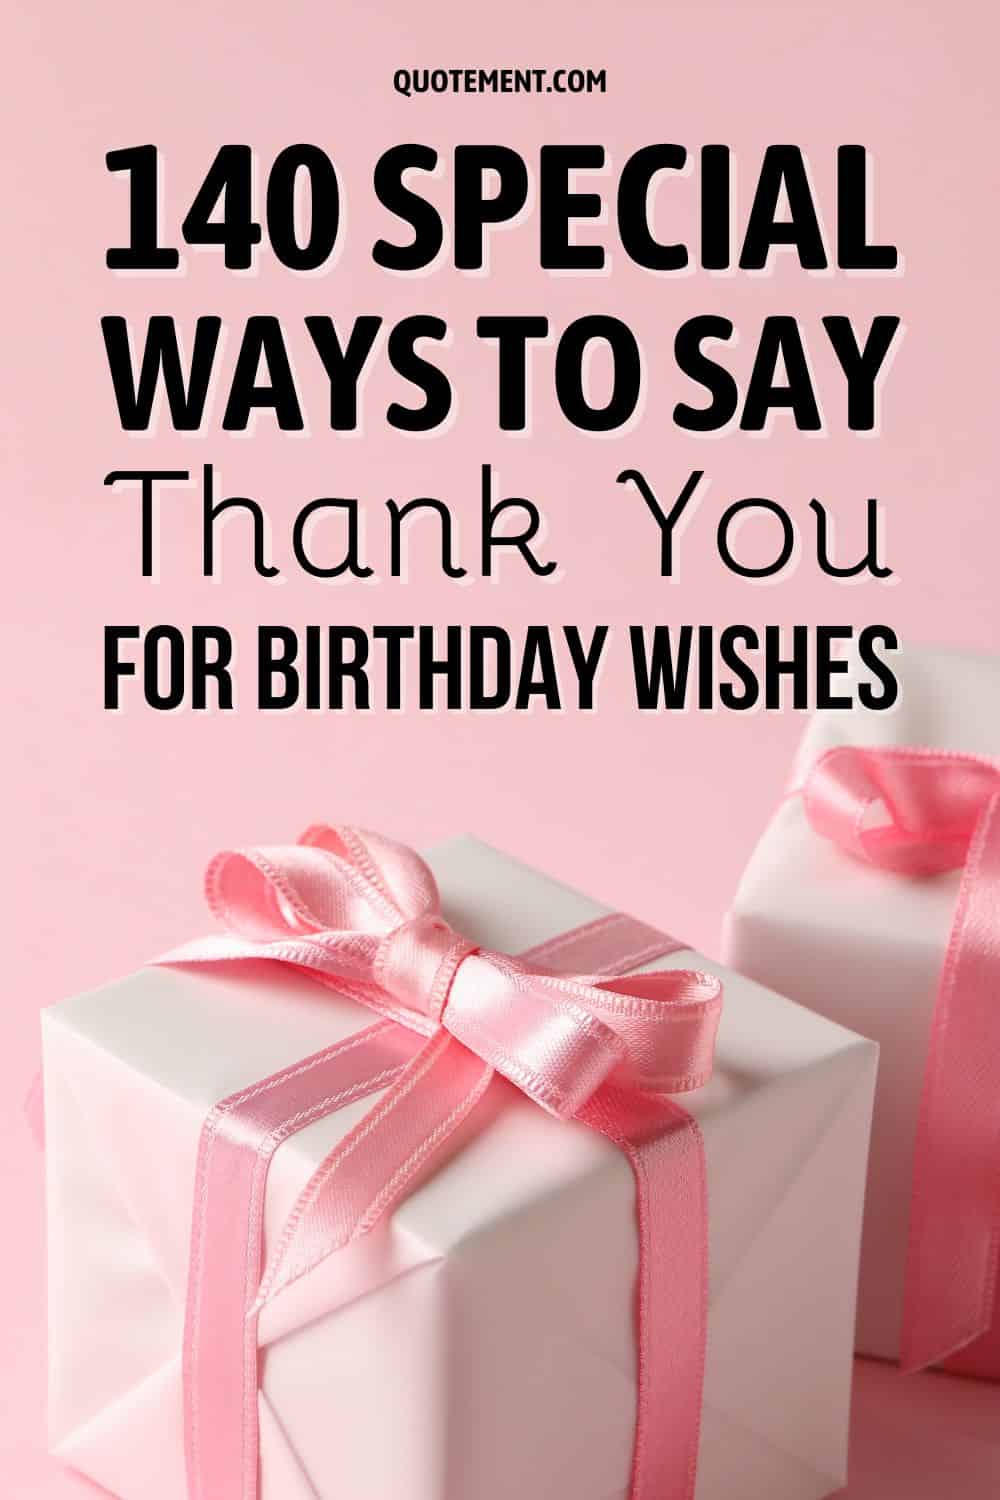 140 Special Ways To Say Thank You For Birthday Wishes
